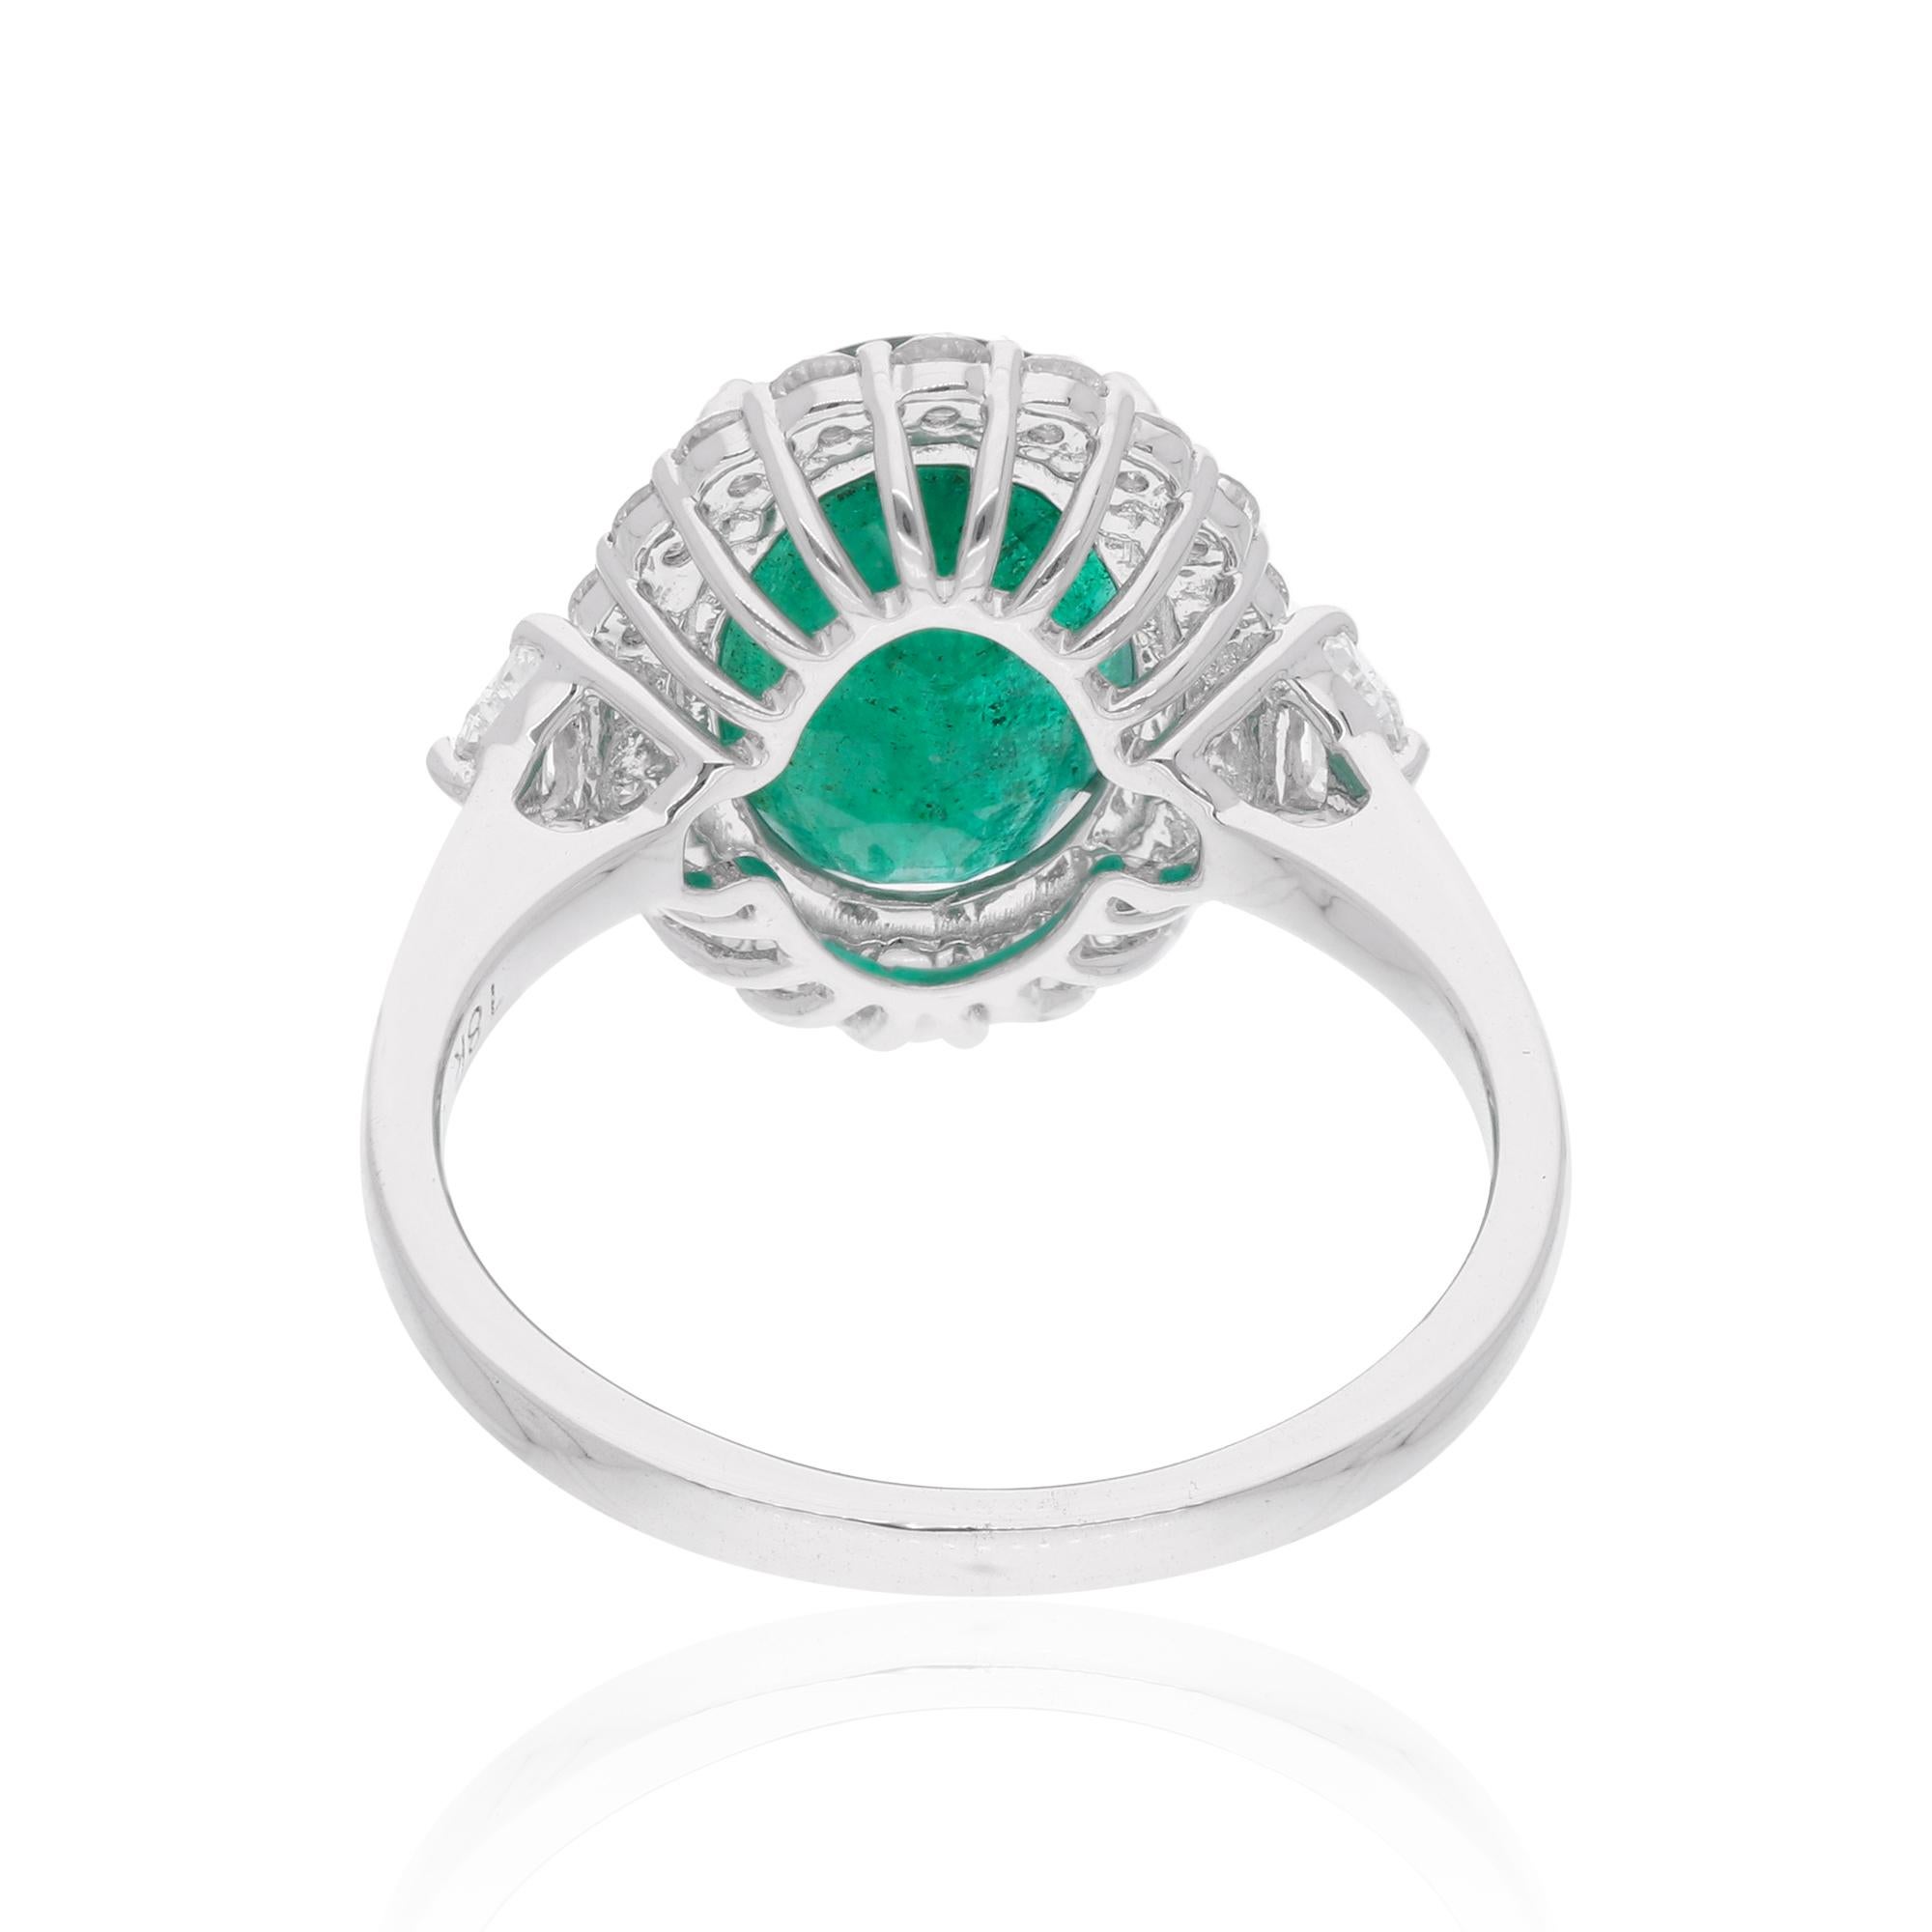 Item Code :- SER-24016
Gross Wt. :- 4.46 gm
18k Solid White Gold Wt. :- 3.64 gm
Natural Diamond Wt. :- 0.64 Ct. ( AVERAGE DIAMOND CLARITY SI1-SI2 & COLOR H-I )
Emerald Wt. :- 3.44 Ct. 
Ring Size :- 7 US & All size available

✦